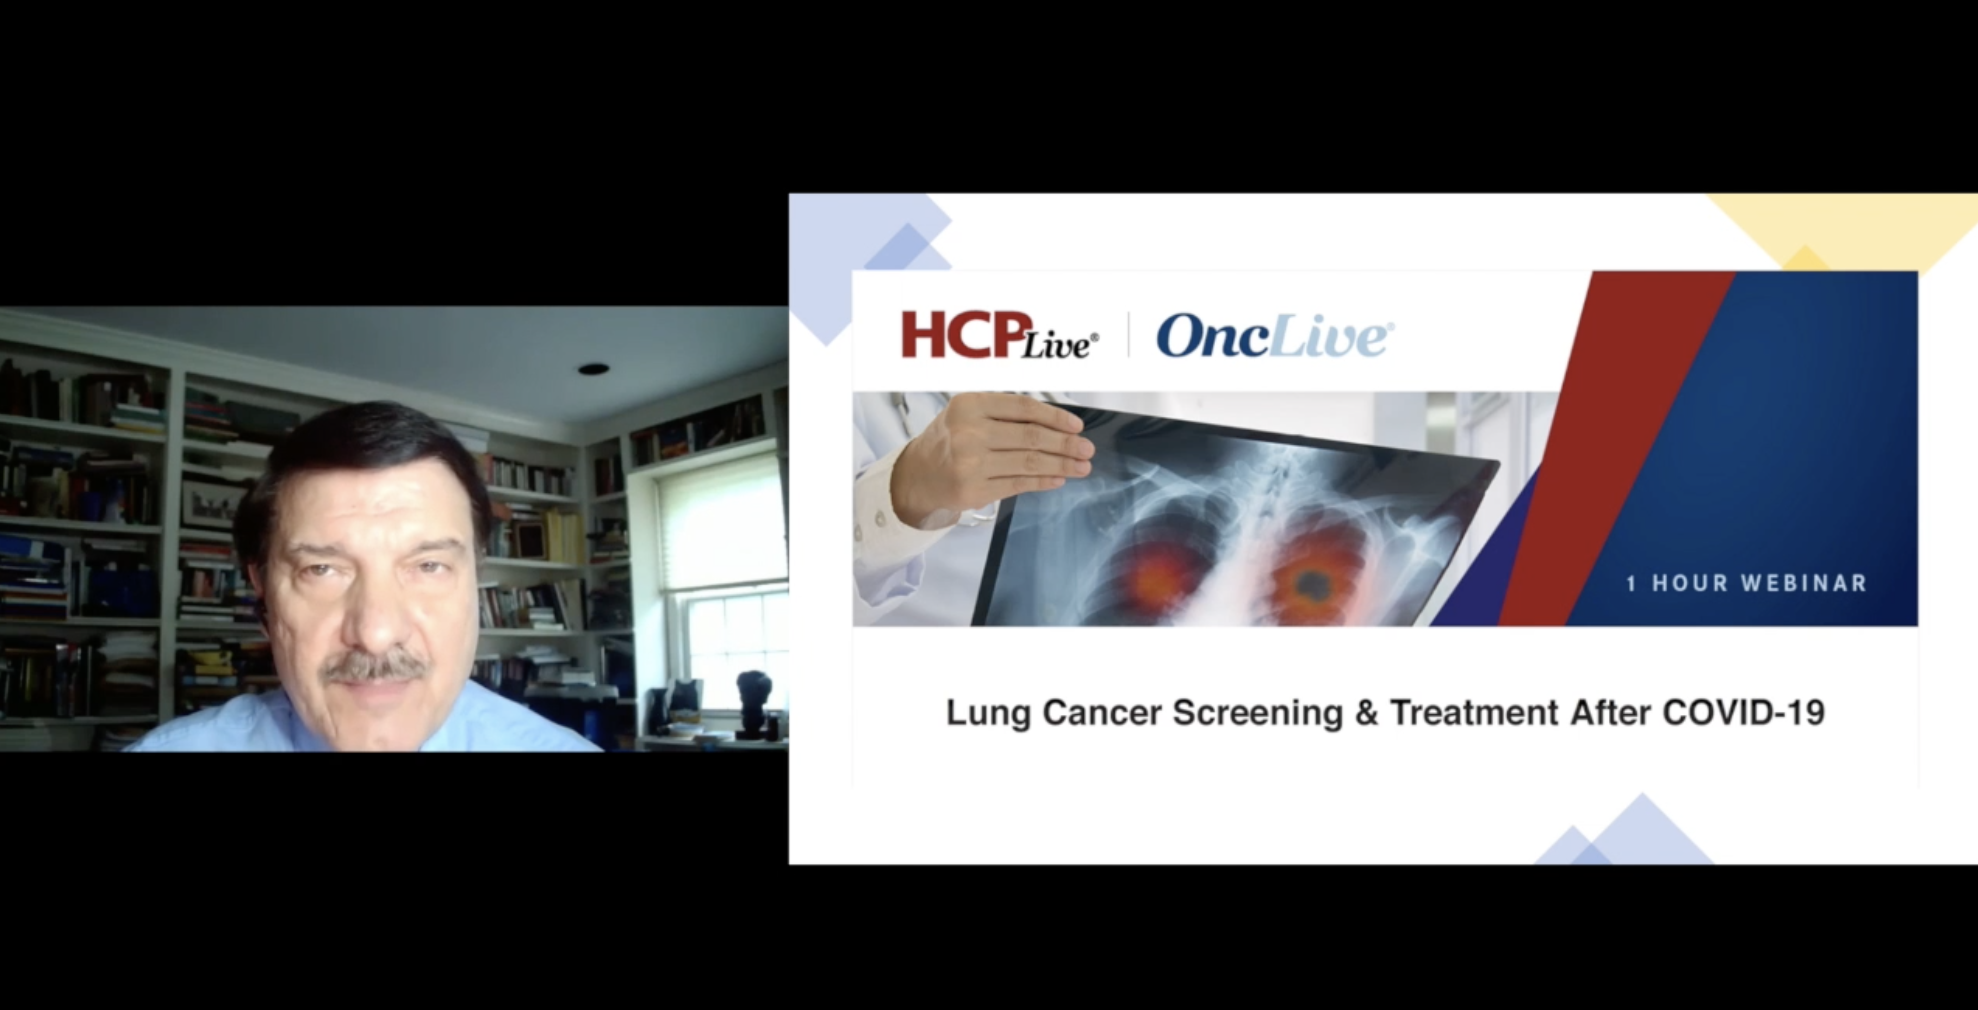 After COVID-19: Lung Cancer Screening and Treatment